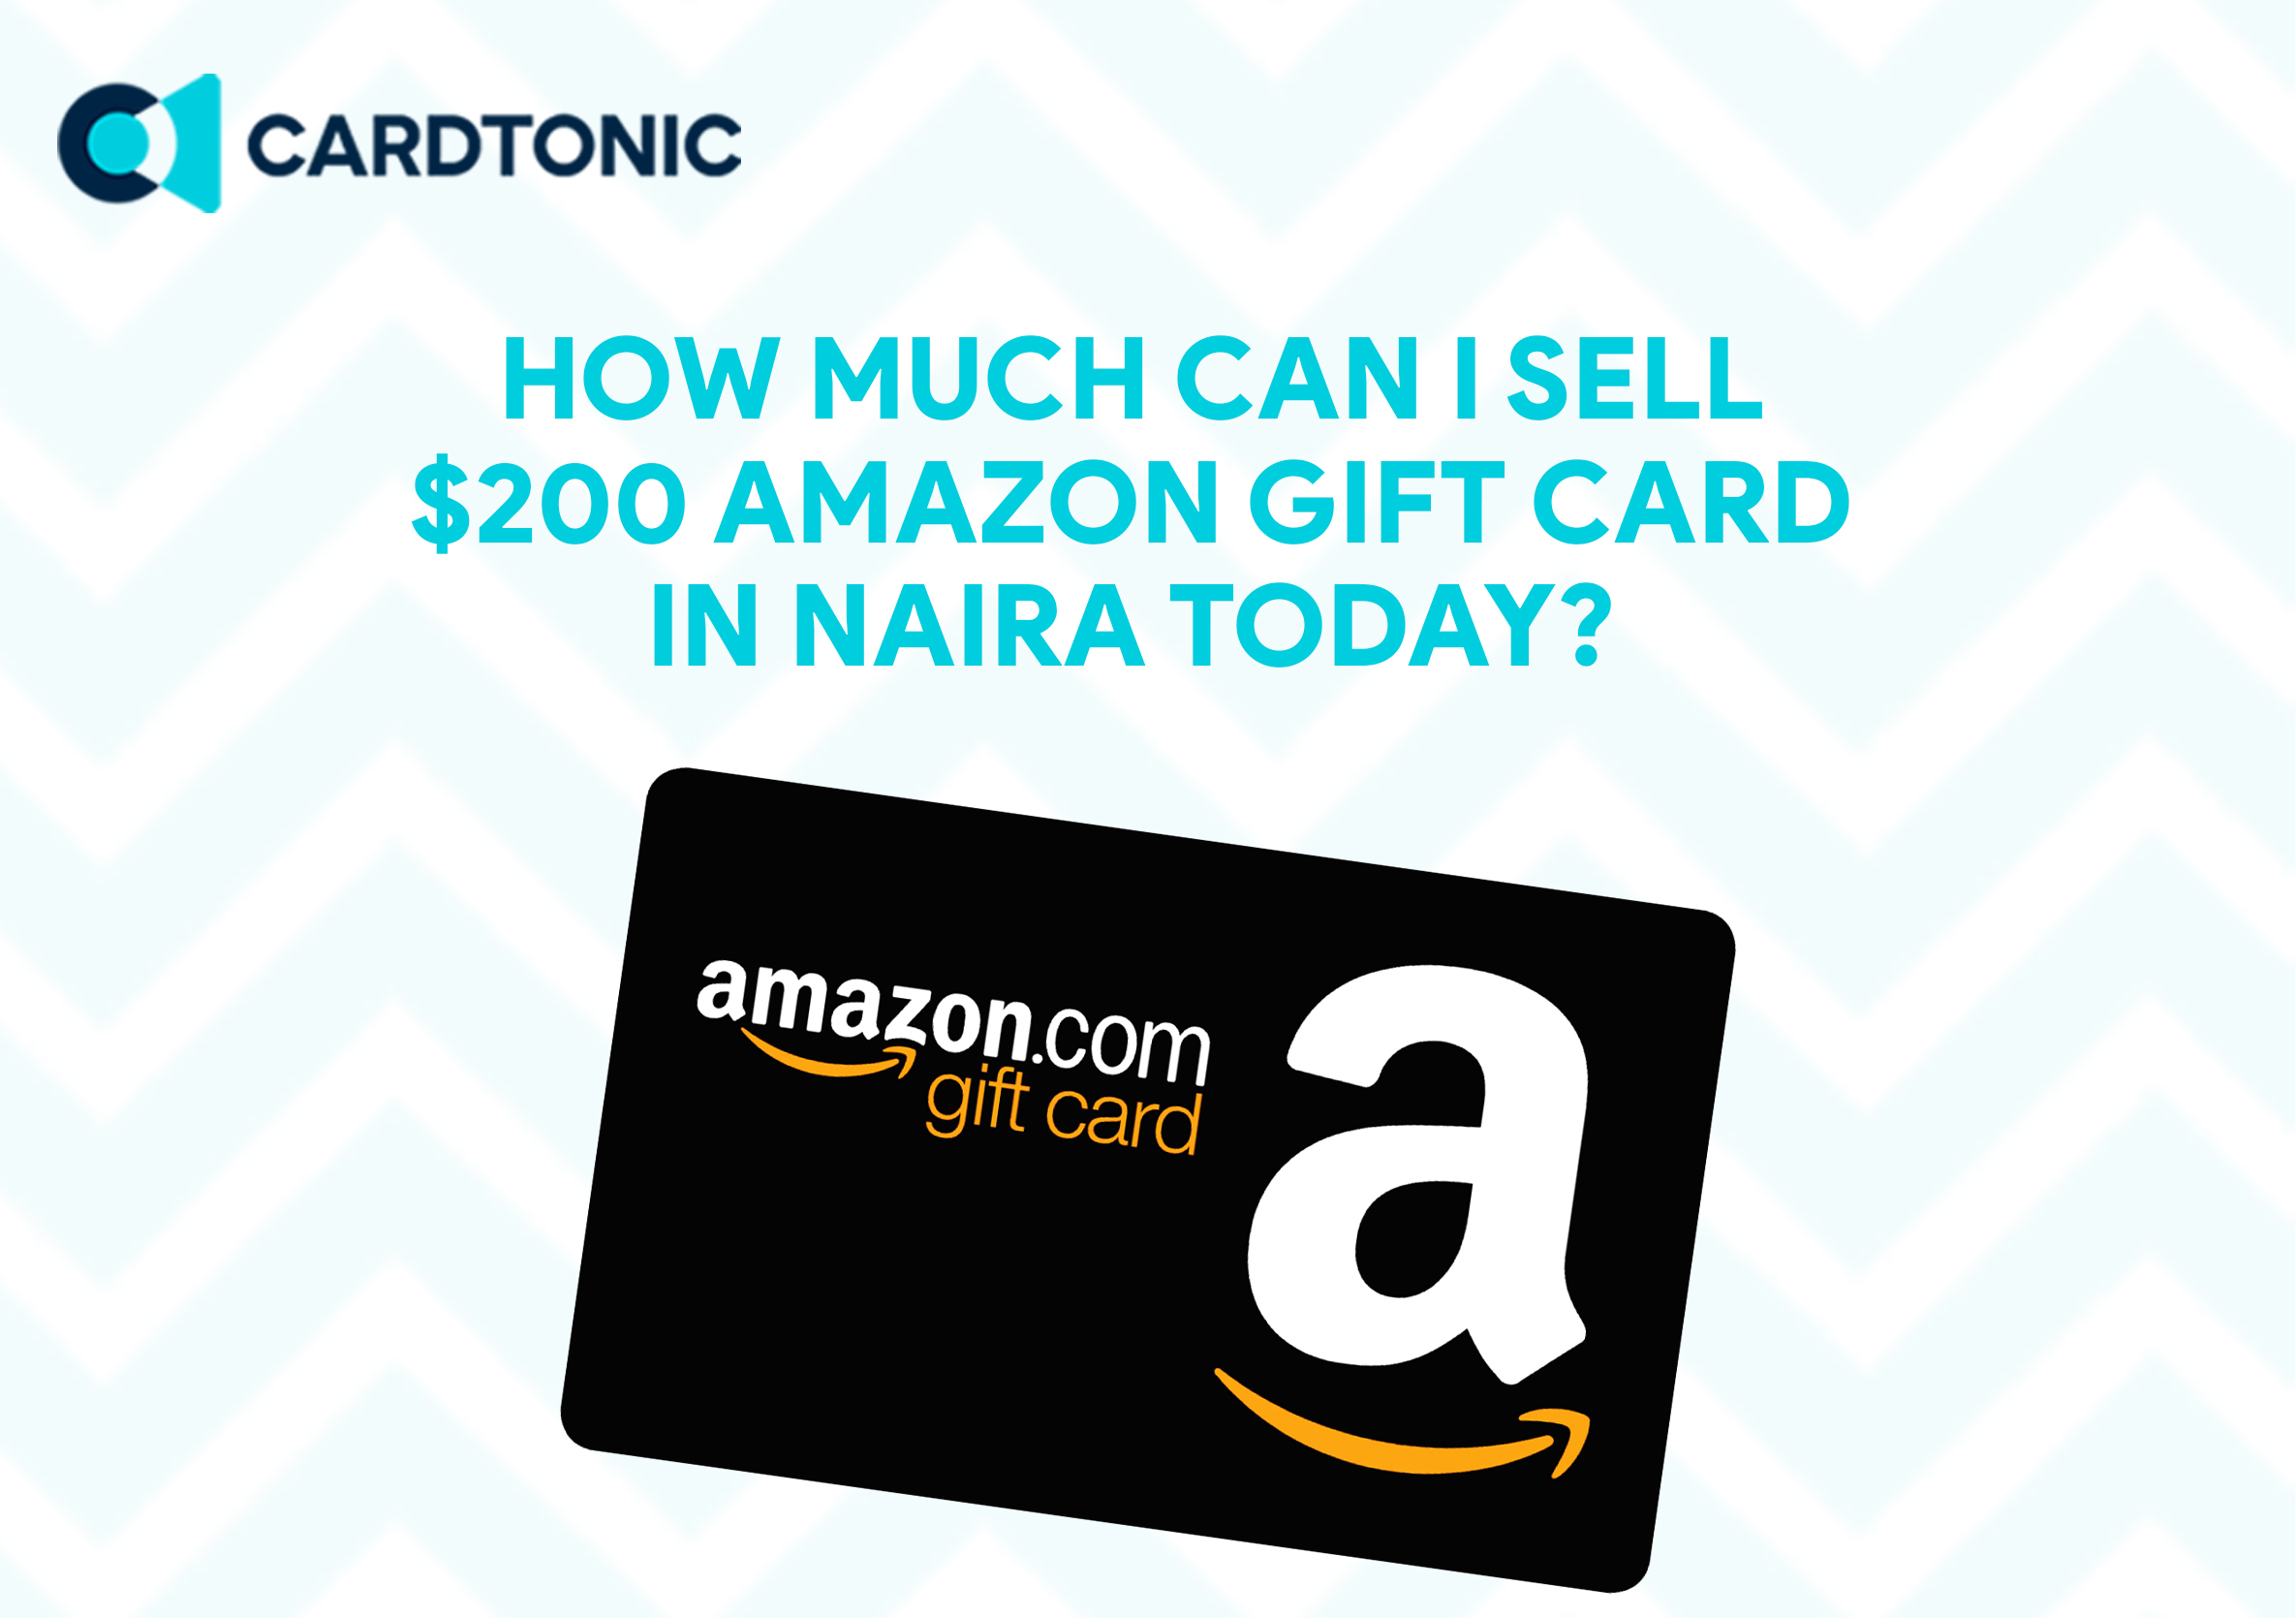 How Much Is My $200 Amazon Gift Card Worth In Naira Today? - Cardtonic